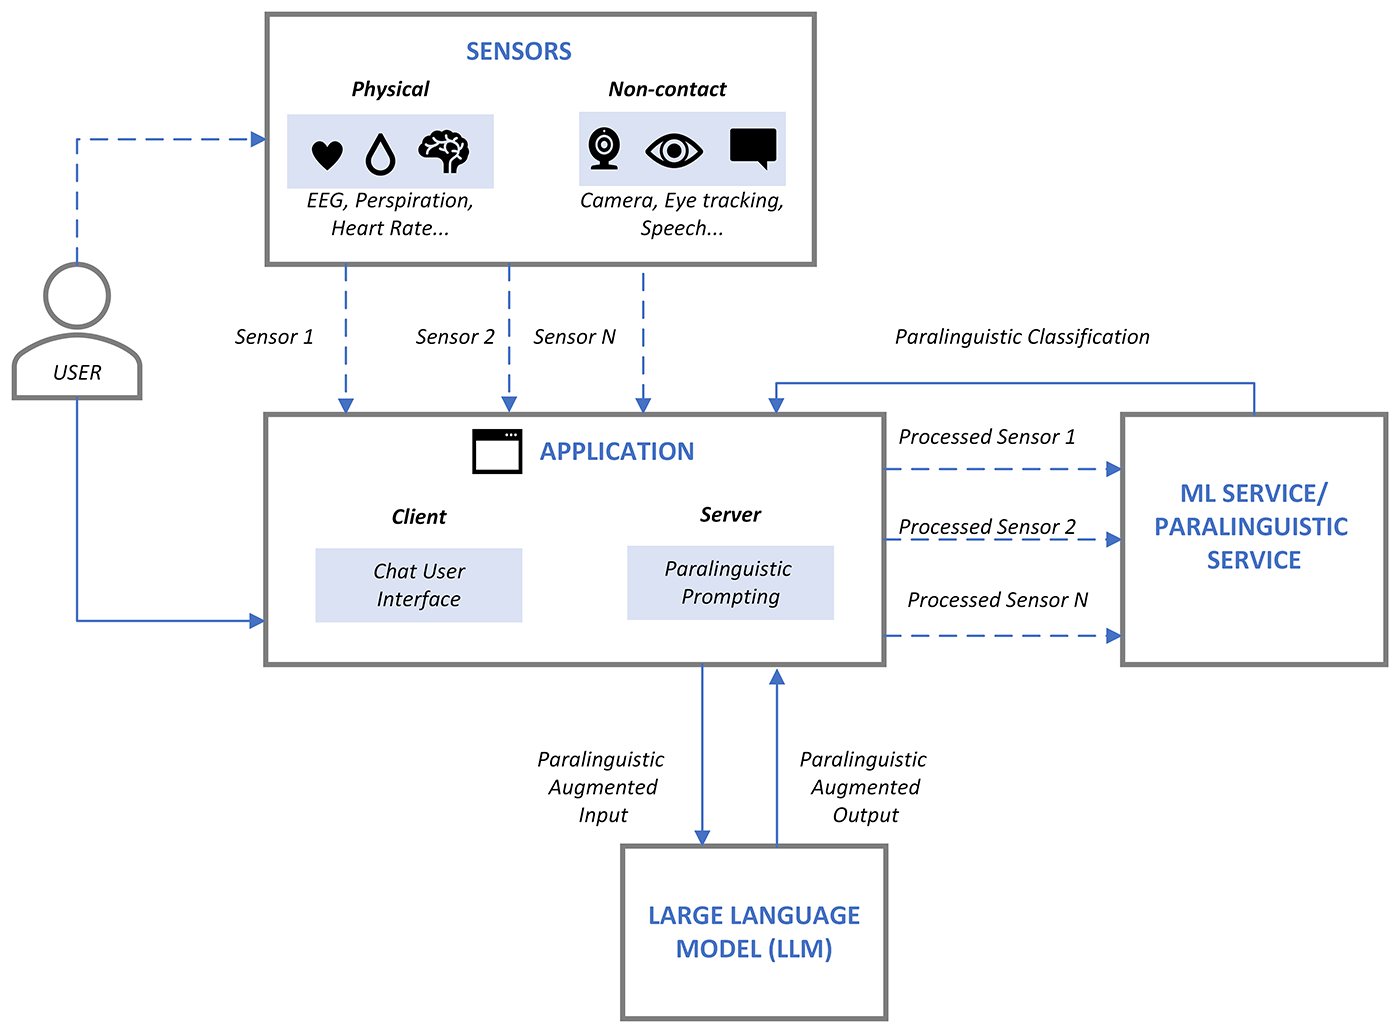 Diagram illustrating user interaction with application. Inputs user’s sensor data such as video and audio and uses processed sensor data to generate paralinguistic classification. This classification augments the input to the LLM, generating an augmented output to application.